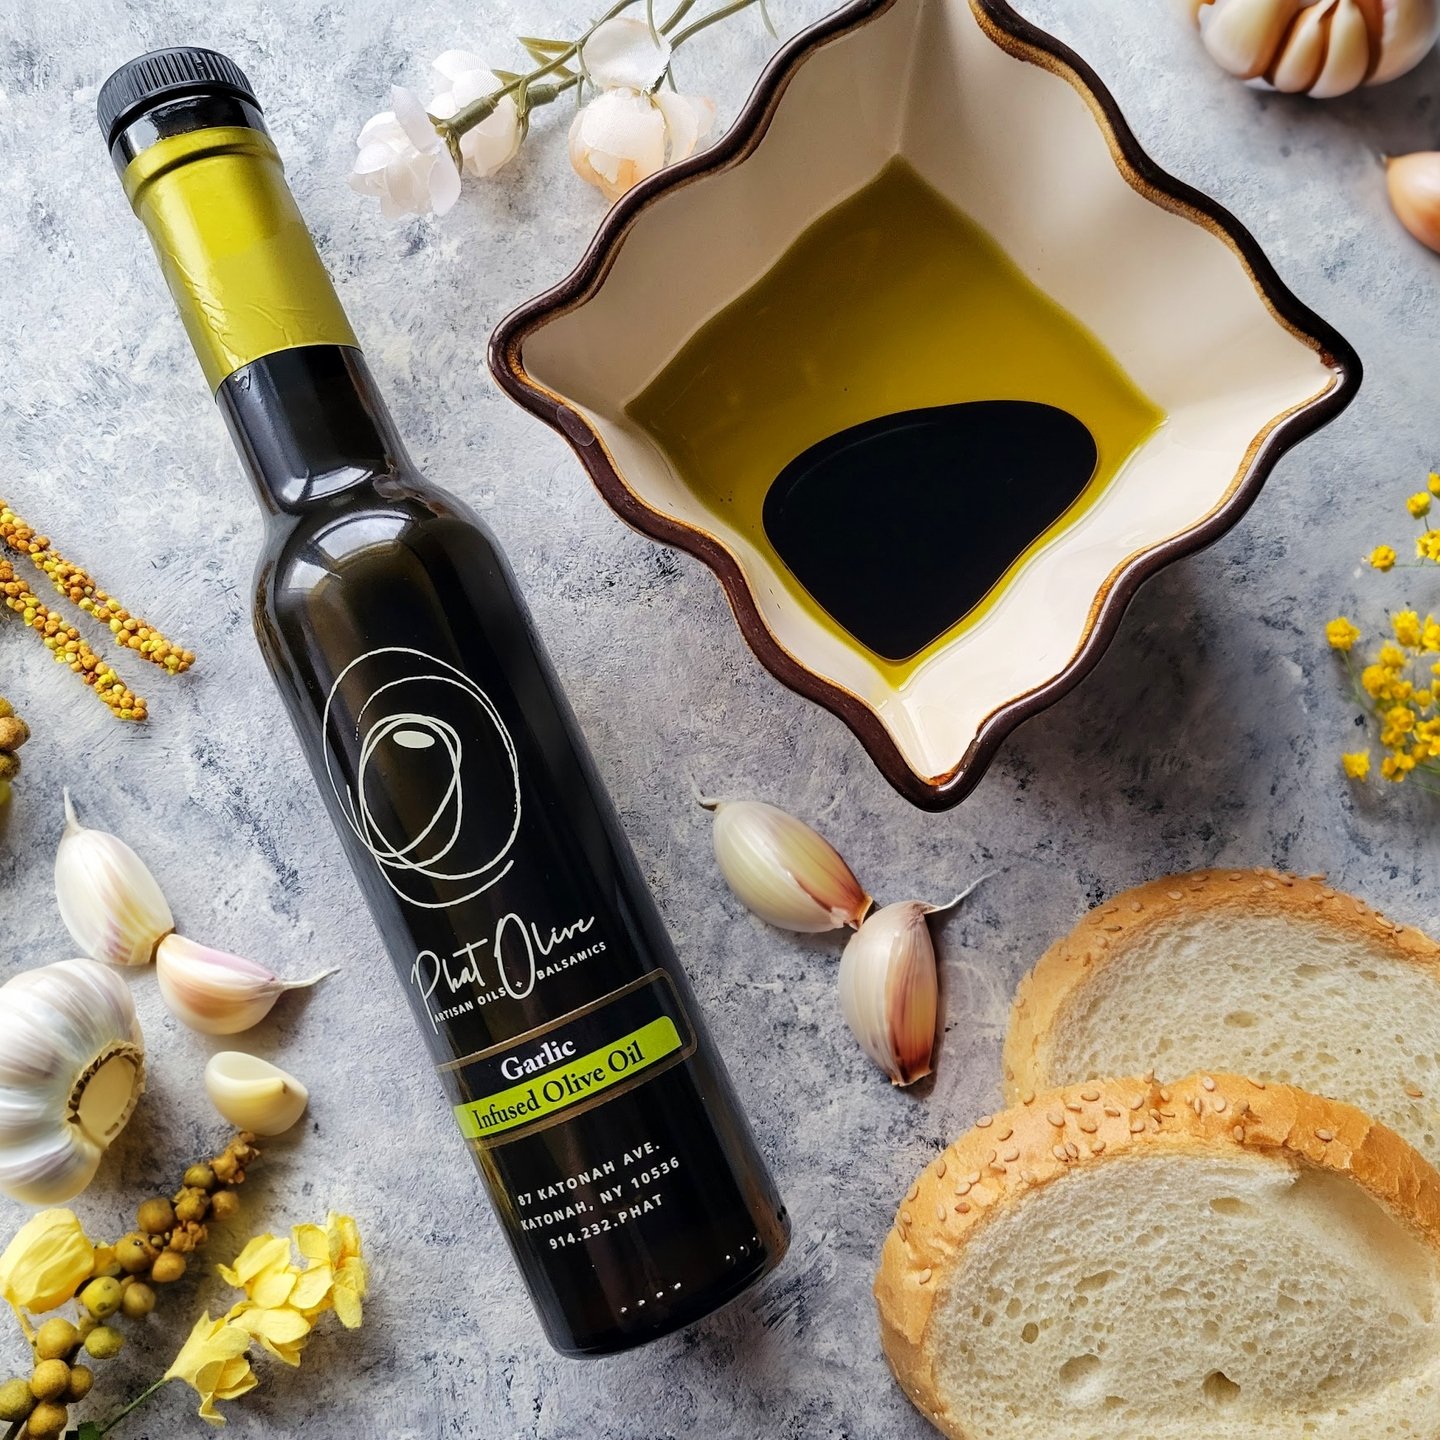 In honor of National Garlic Month, we're celebrating with our irresistible garlic-infused olive oil! 🧄 From pasta to veggies, it's the secret ingredient your recipes have been missing.